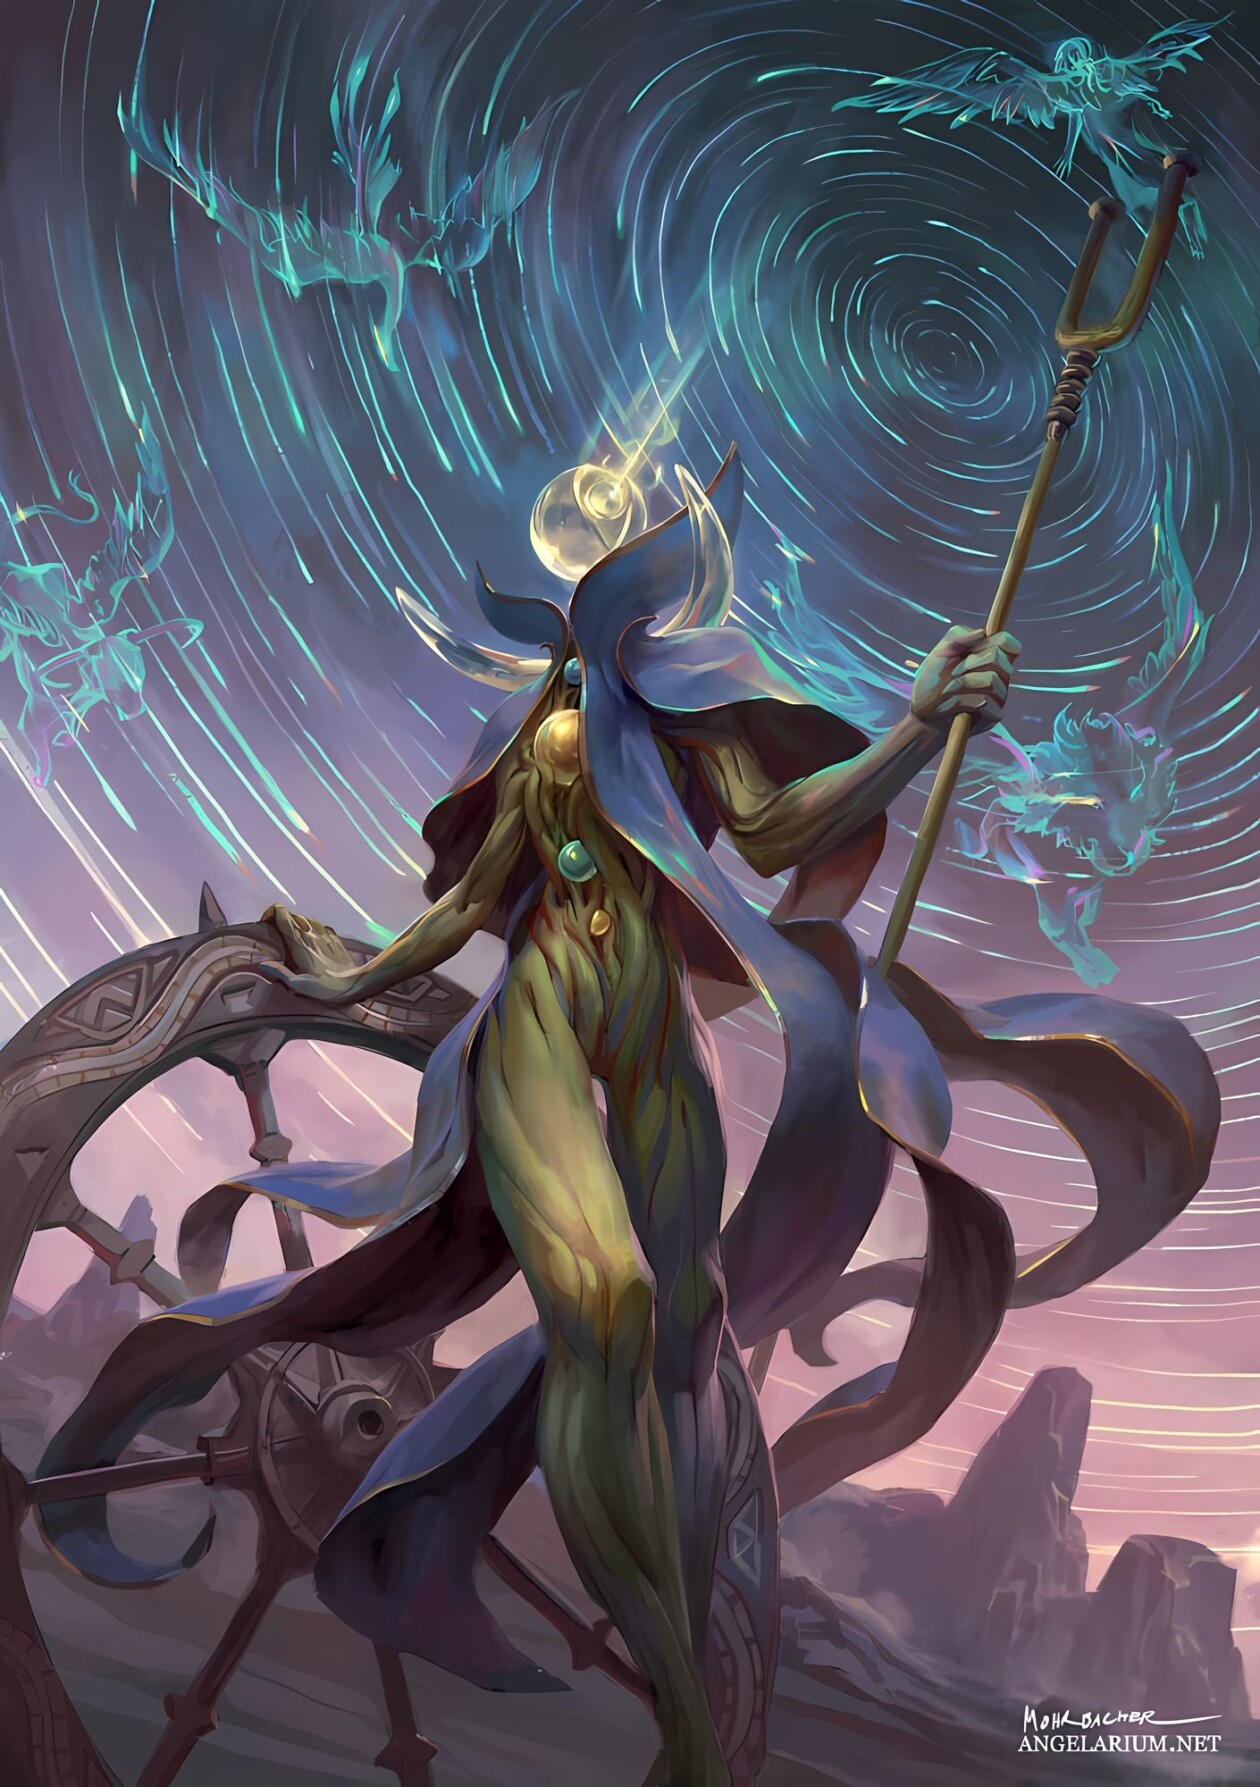 Peter Mohrbacher Blends Surrealism With Fantasy To Create Powerful Magical Beings (16)